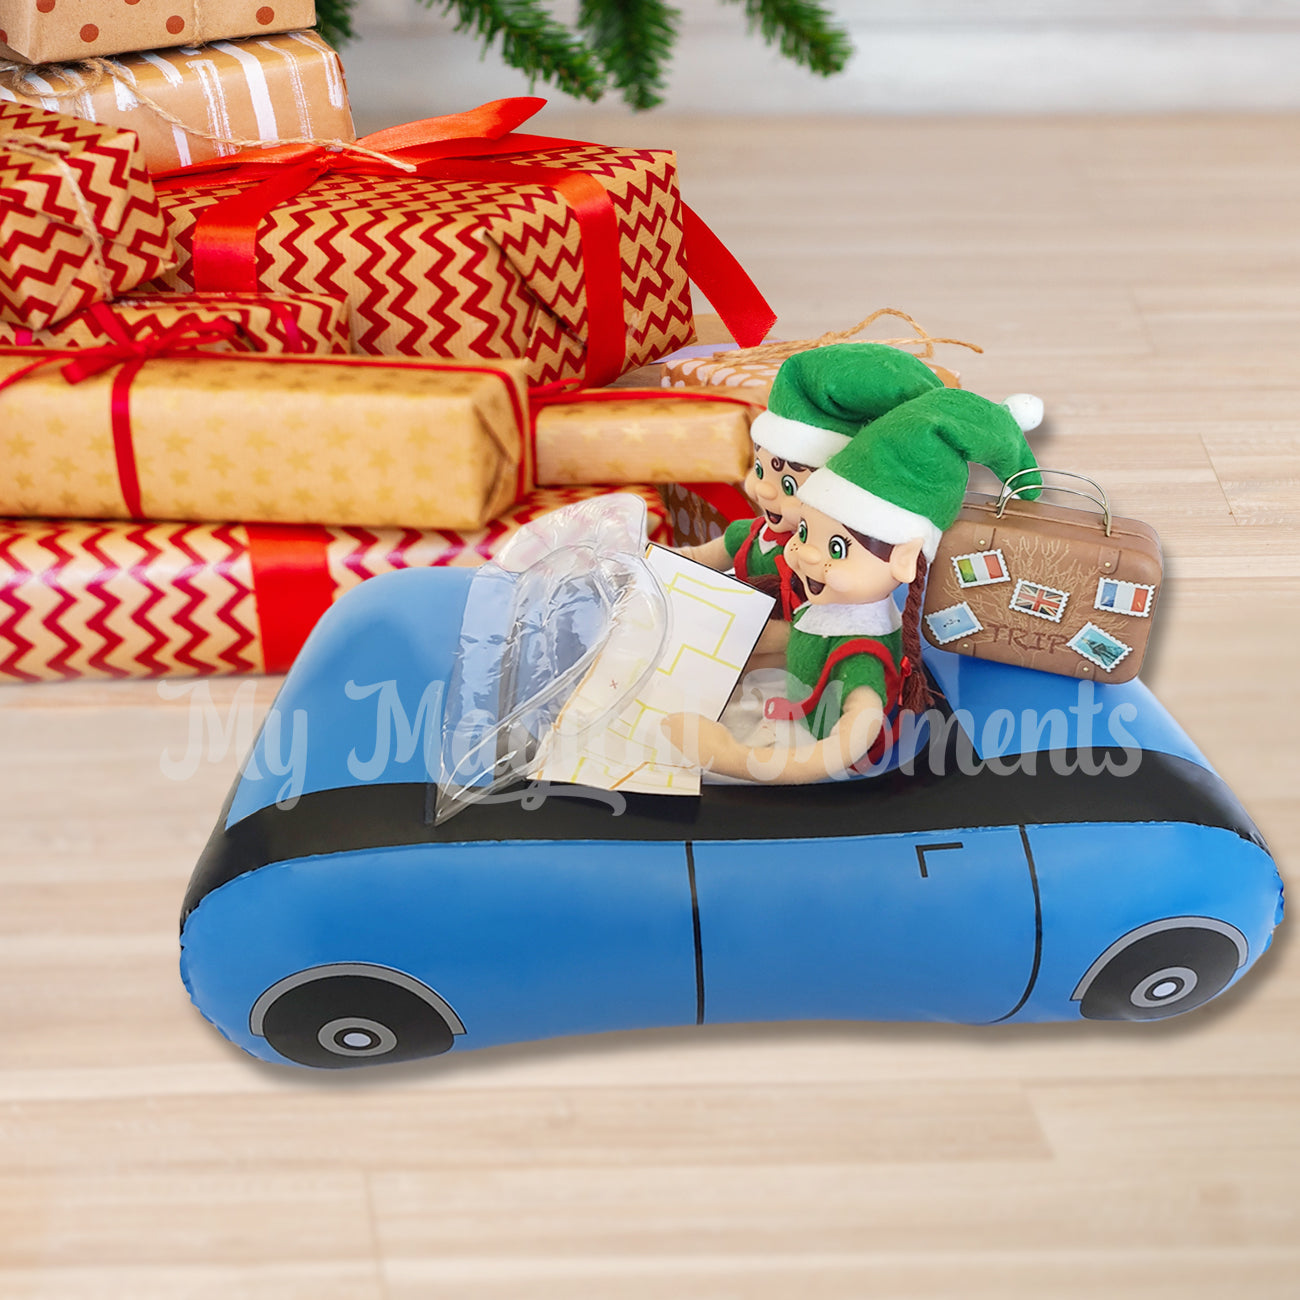 Elves going on a road trip around the Christmas tree in their mini car and suitcase